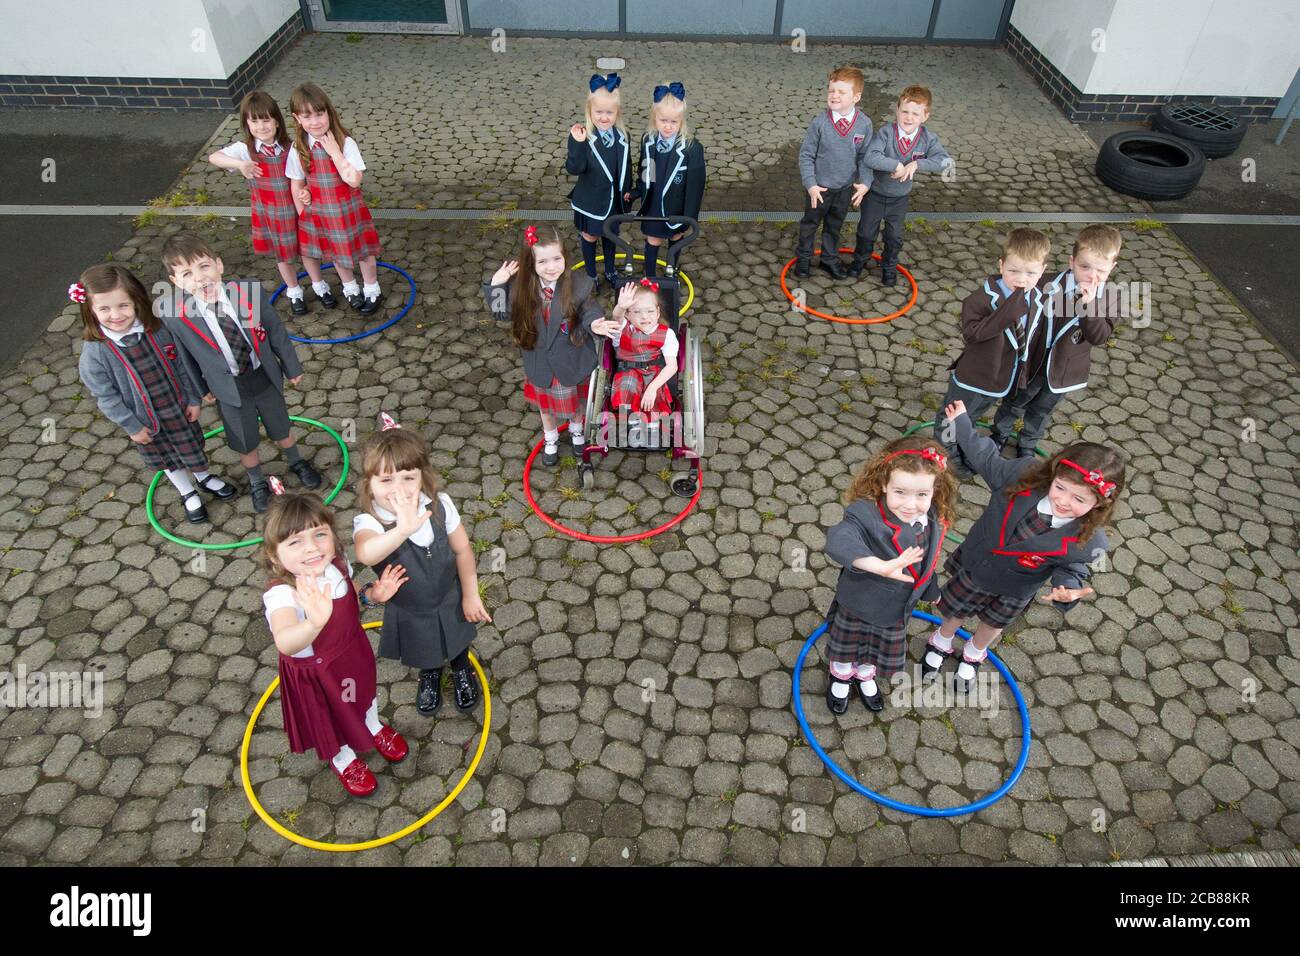 Port Glasgow, Scotland, UK. 11th Aug, 2020. Pictured: Eight sets of twins start school in Inverclyde Eight sets of twins are set to start their first day of school in Inverclyde. Names: (top row L-R) Aria & Isla McLaughlin; Alice & Penny Beer; Connor & John Branchfield; (middle row L-R) Ben & Stuart Miller; (bottom row L-R) (bottom row L-R) Lola & Malena Perez Malone; Eva & Iona Metcalf. Credit: Colin Fisher/Alamy Live News Stock Photo